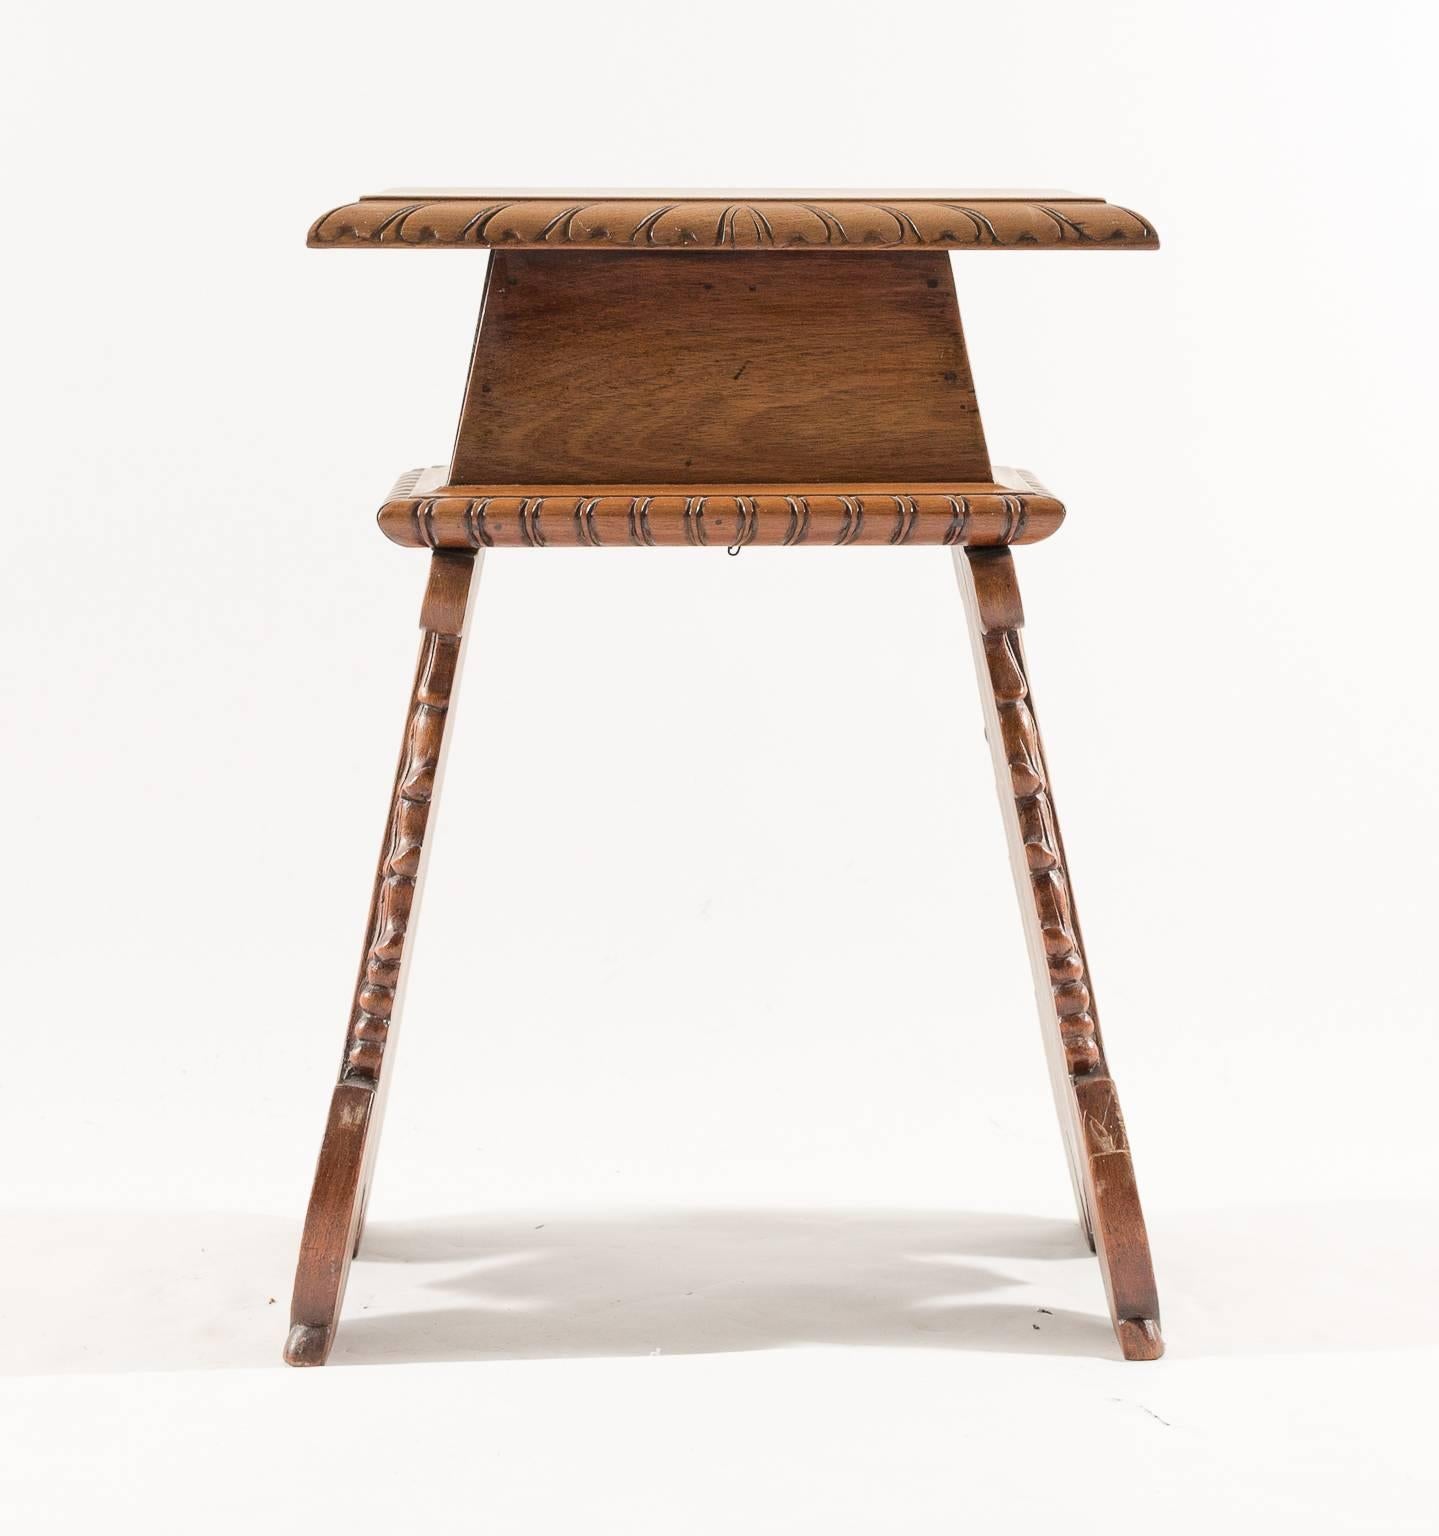 Well crafted Dutch stool or side table, made of oak.